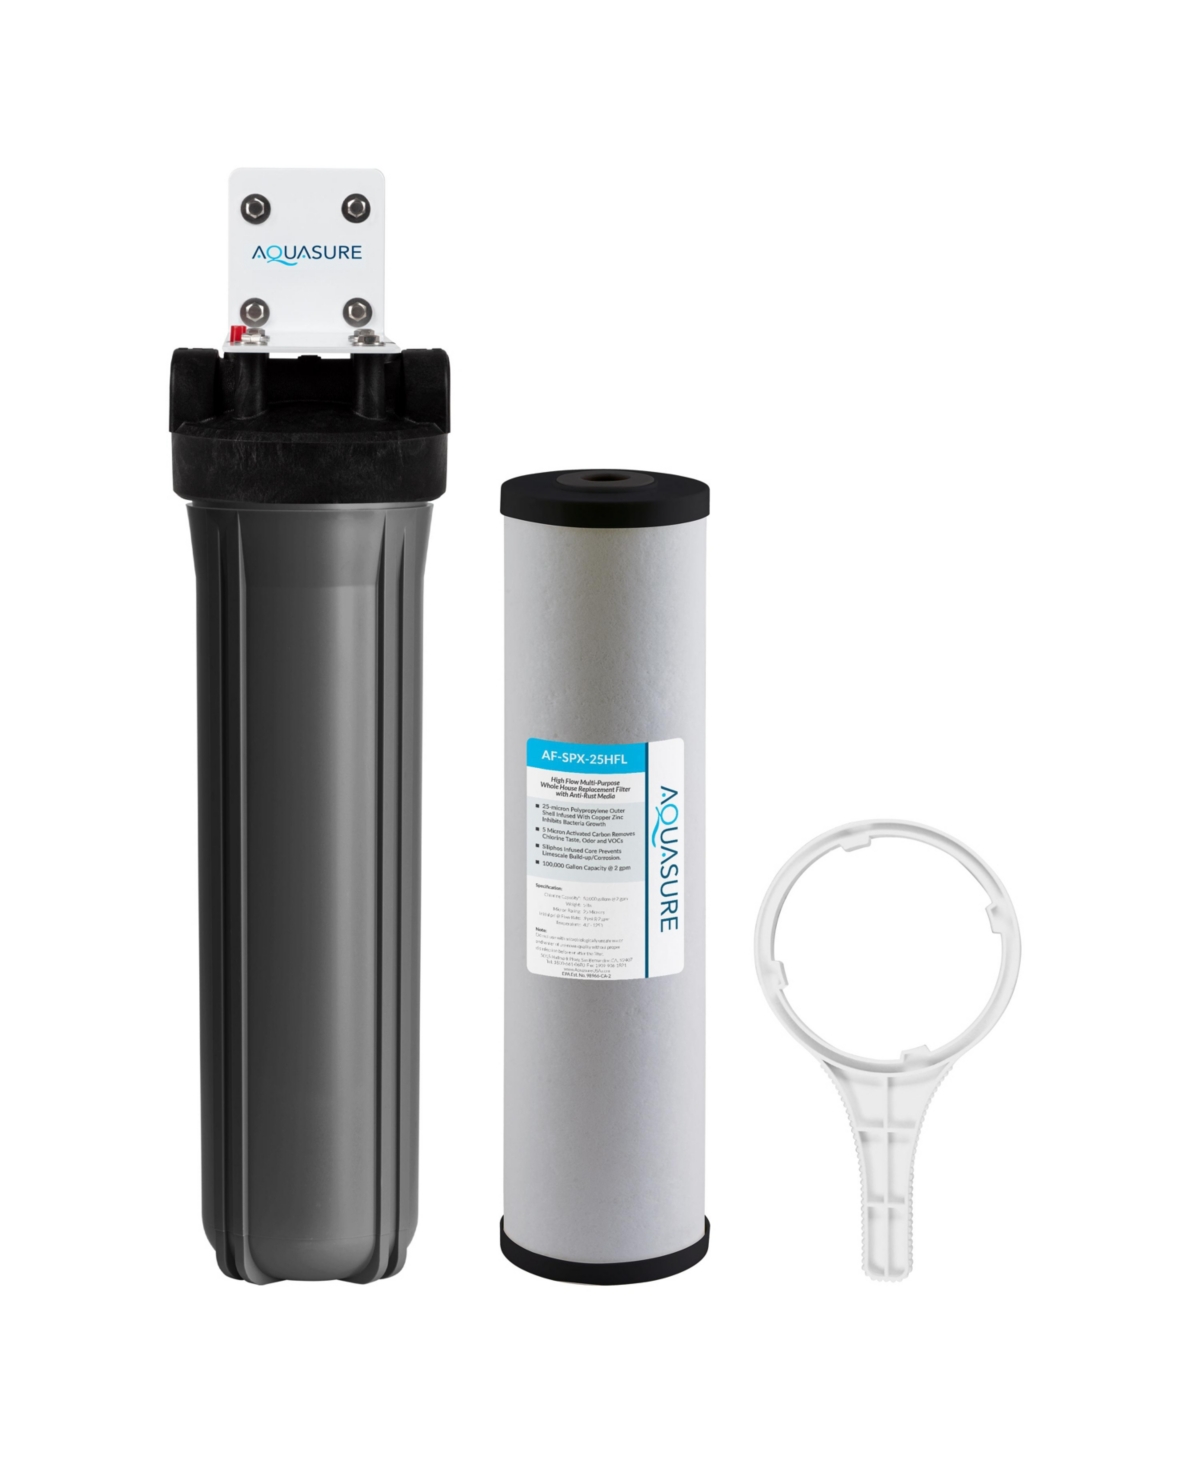 Fortitude V2 Series Multi-purpose Whole House Water Treatment System with Siliphos - Large Size - Black